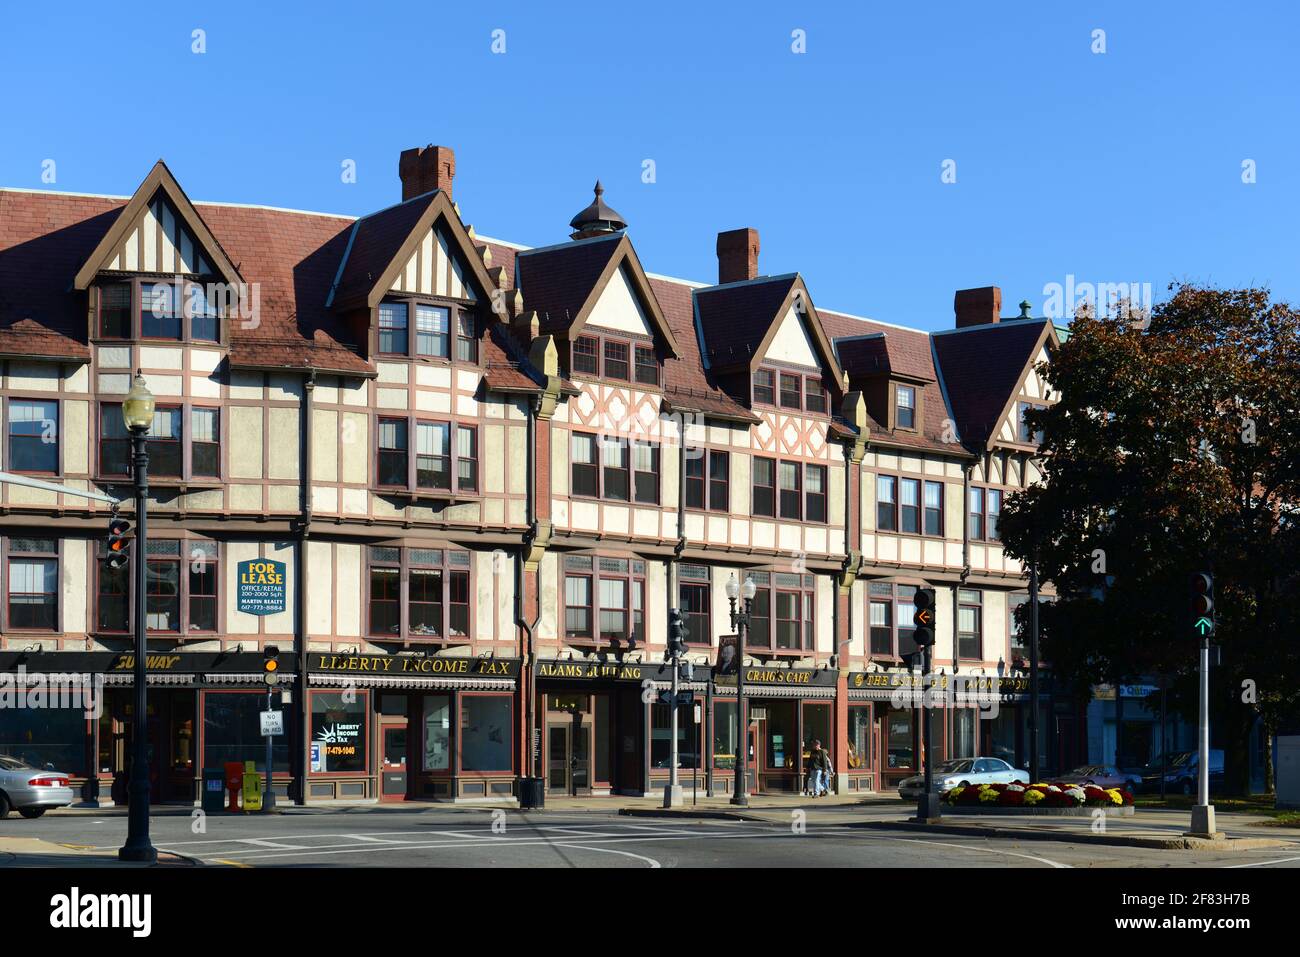 Adams Building, built in 1880, is a historical commercial building with Tudor Revival style at Hancock Street in downtown Quincy, Massachusetts MA, US Stock Photo